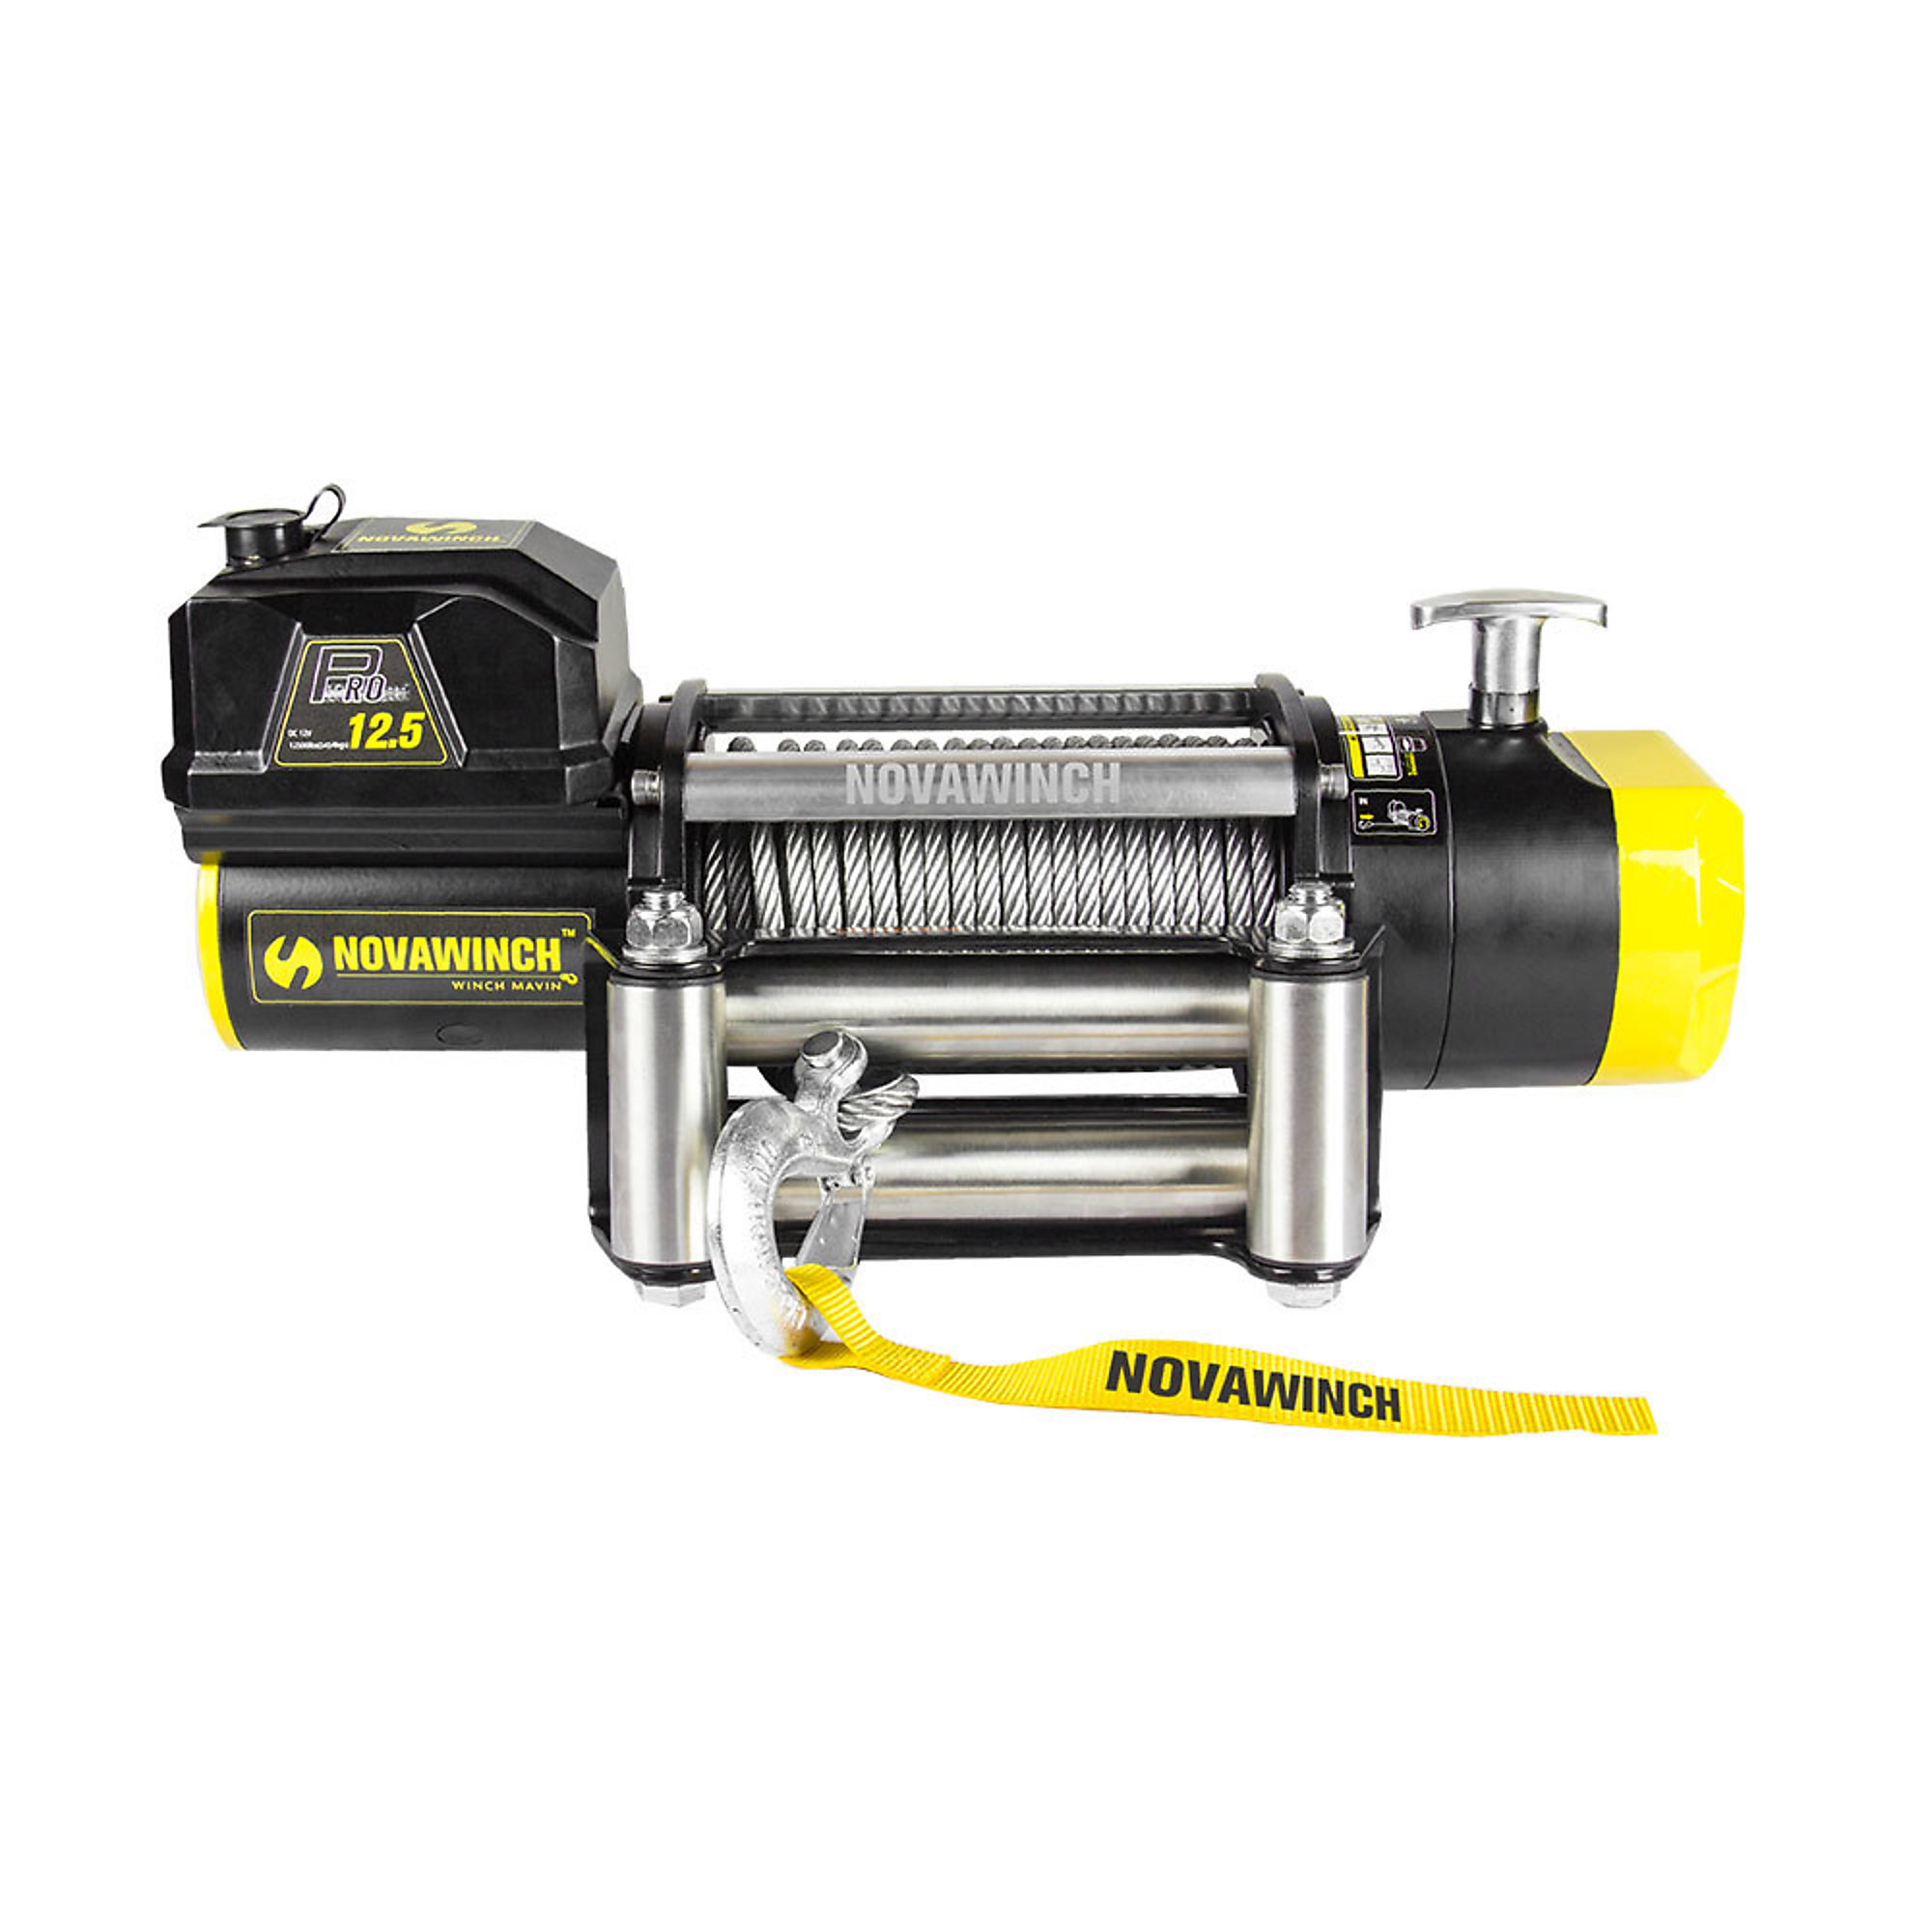 Novawinch, Truck/Trailer 12V DC Powered Winch, Capacity (Line Pull) 12500 lb, Volts 12, Max. Amps 390, Model 701001068587